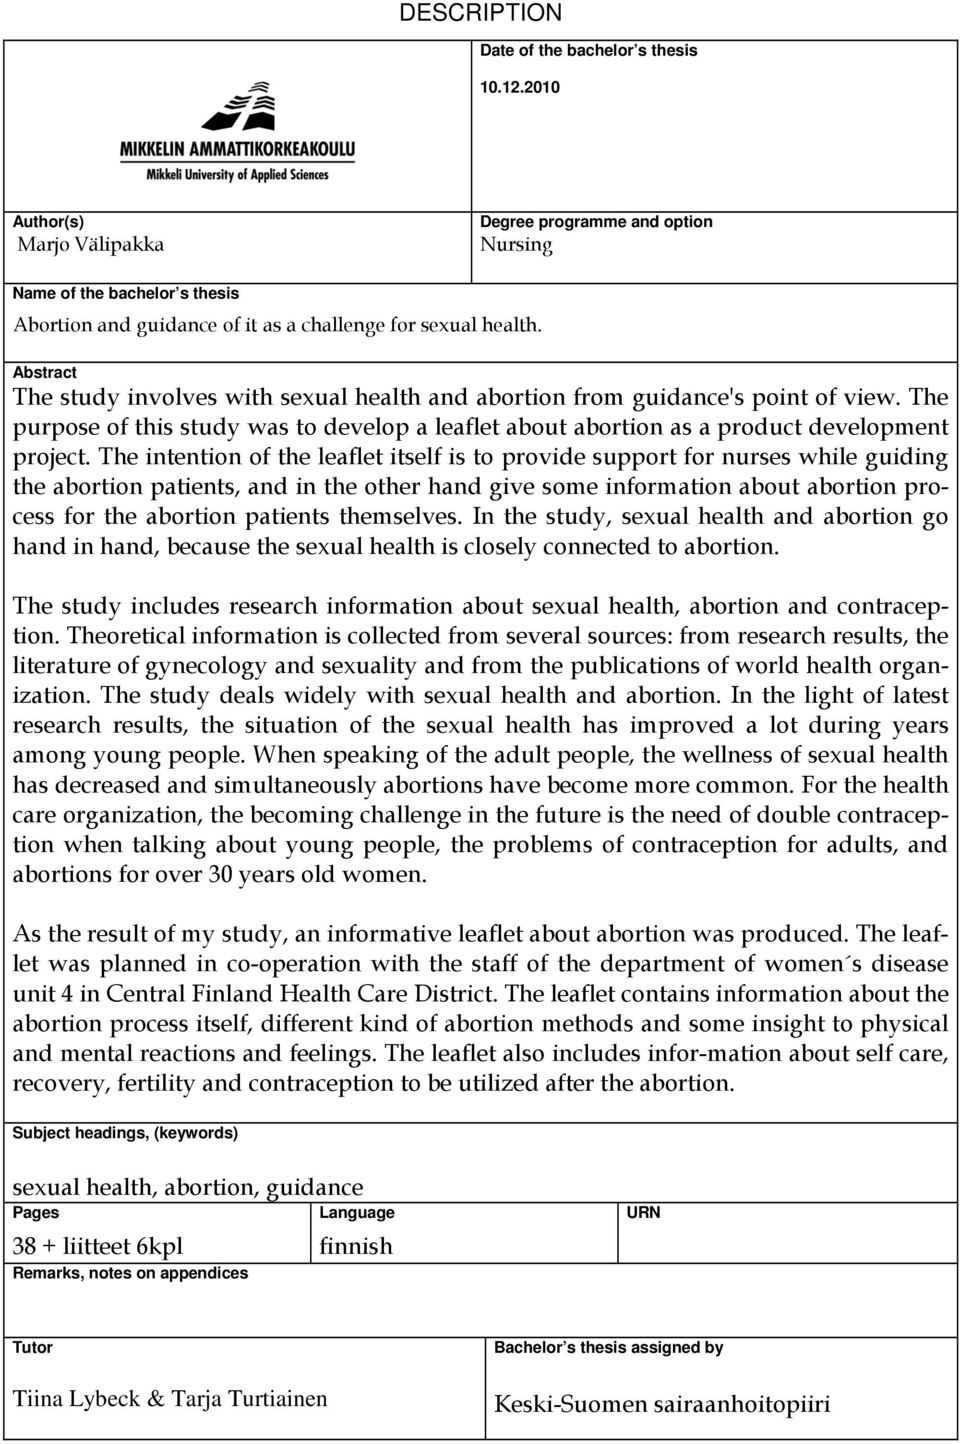 Abstract The study involves with sexual health and abortion from guidance's point of view. The purpose of this study was to develop a leaflet about abortion as a product development project.